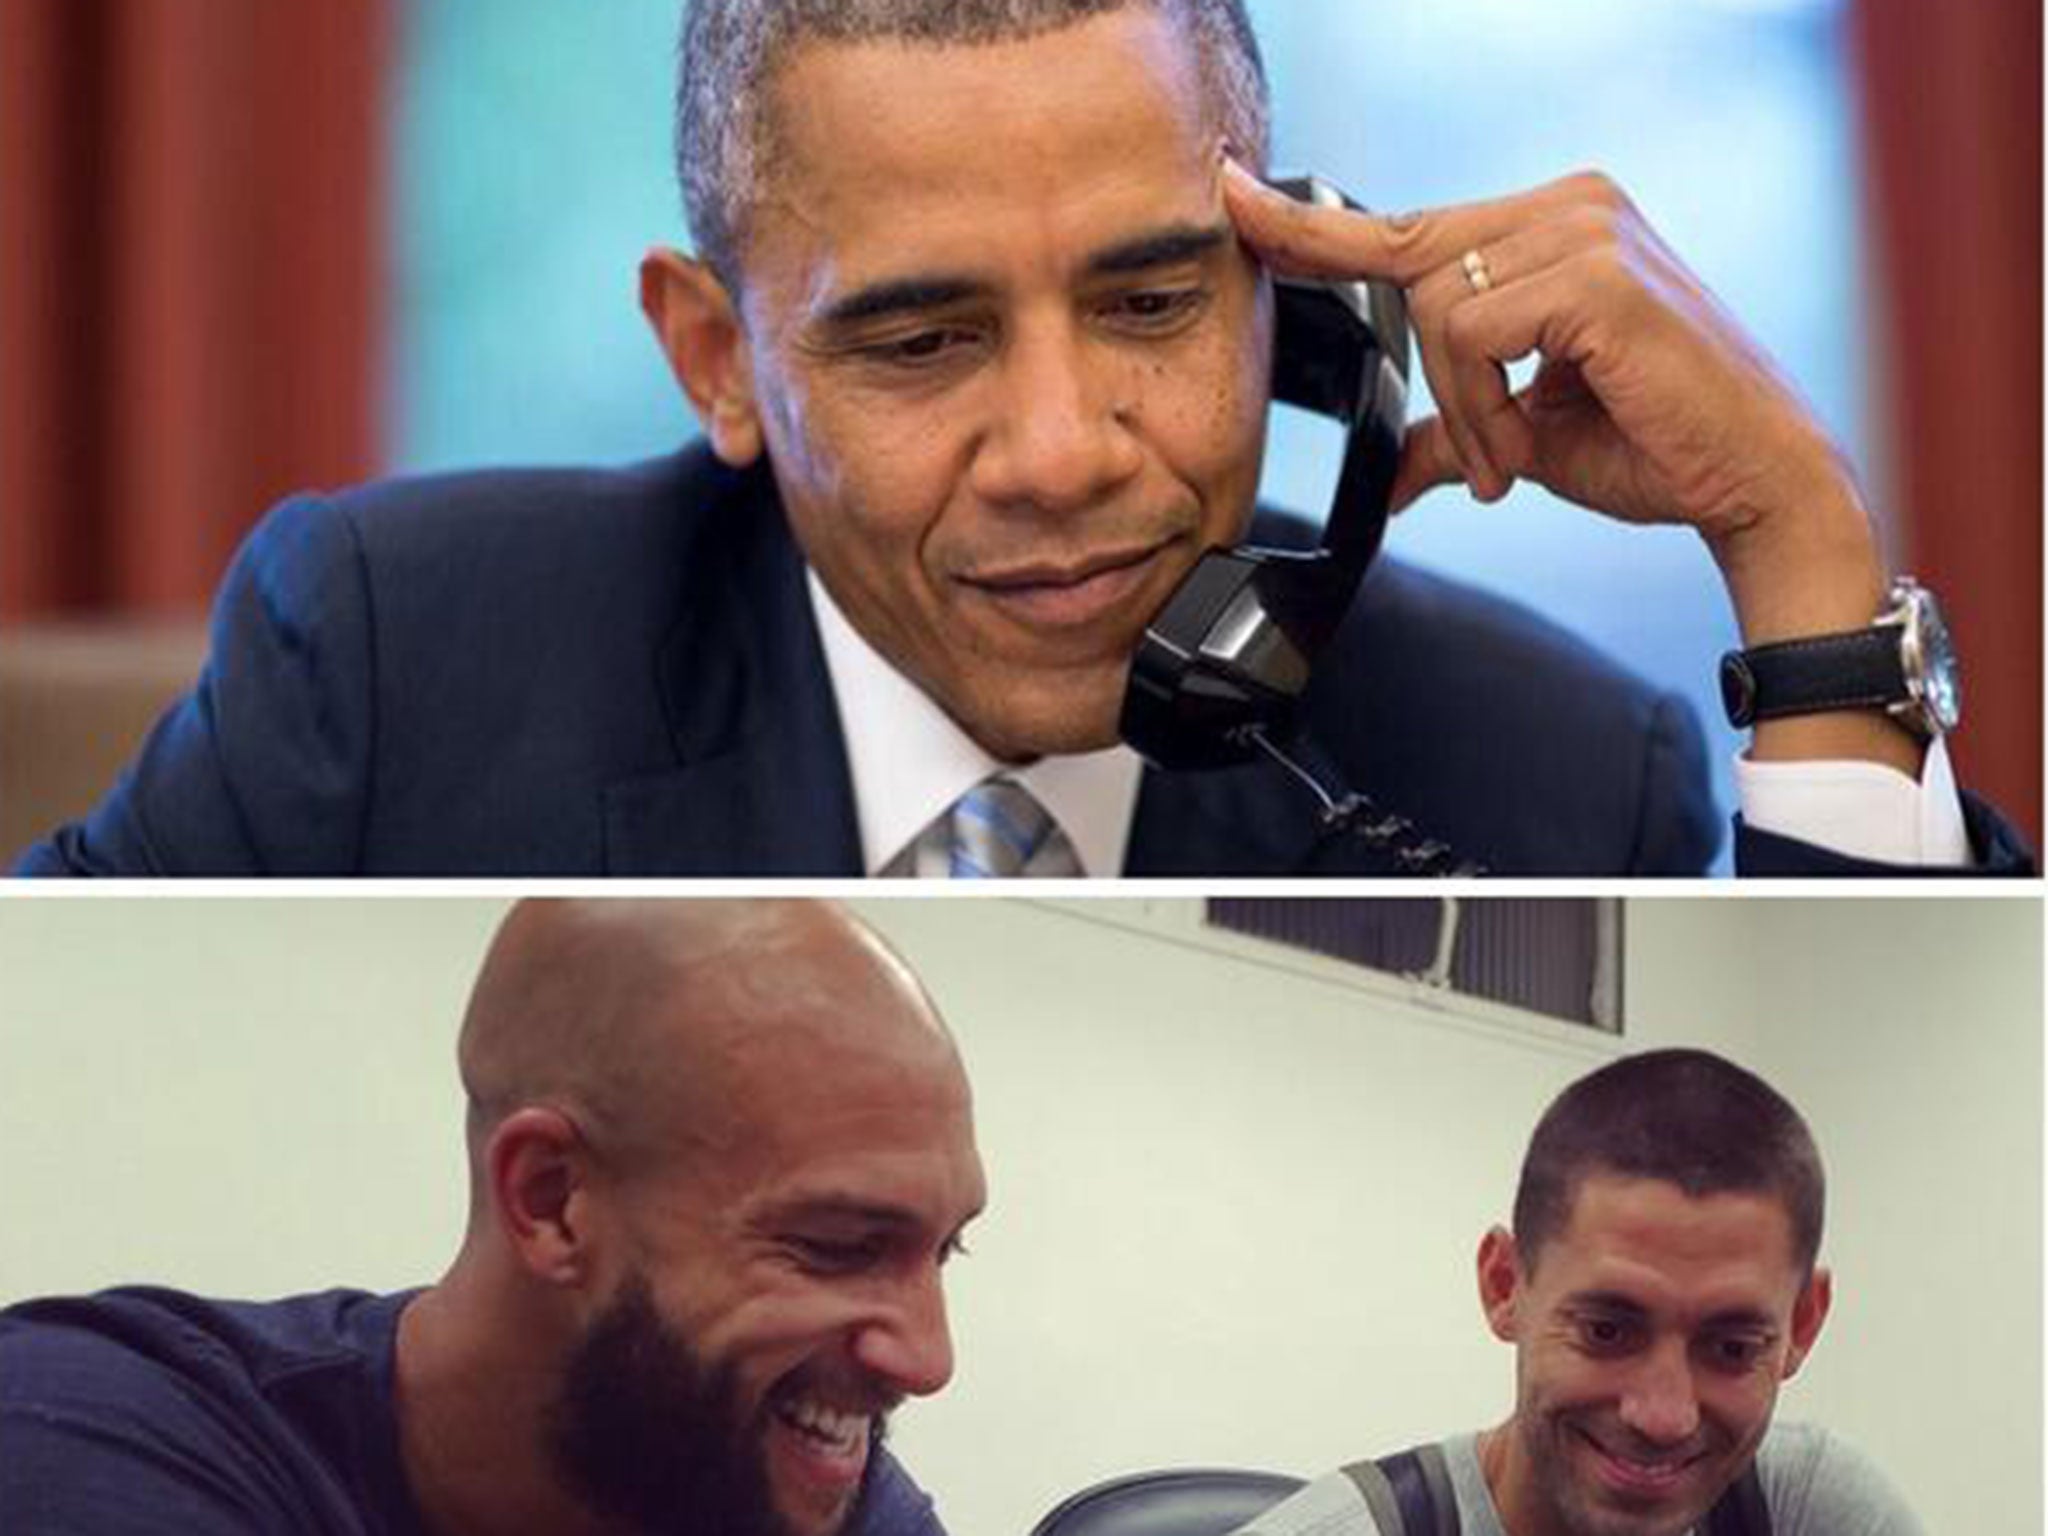 President Barack Obama speaks to Clint Dempsey and Tim Howard